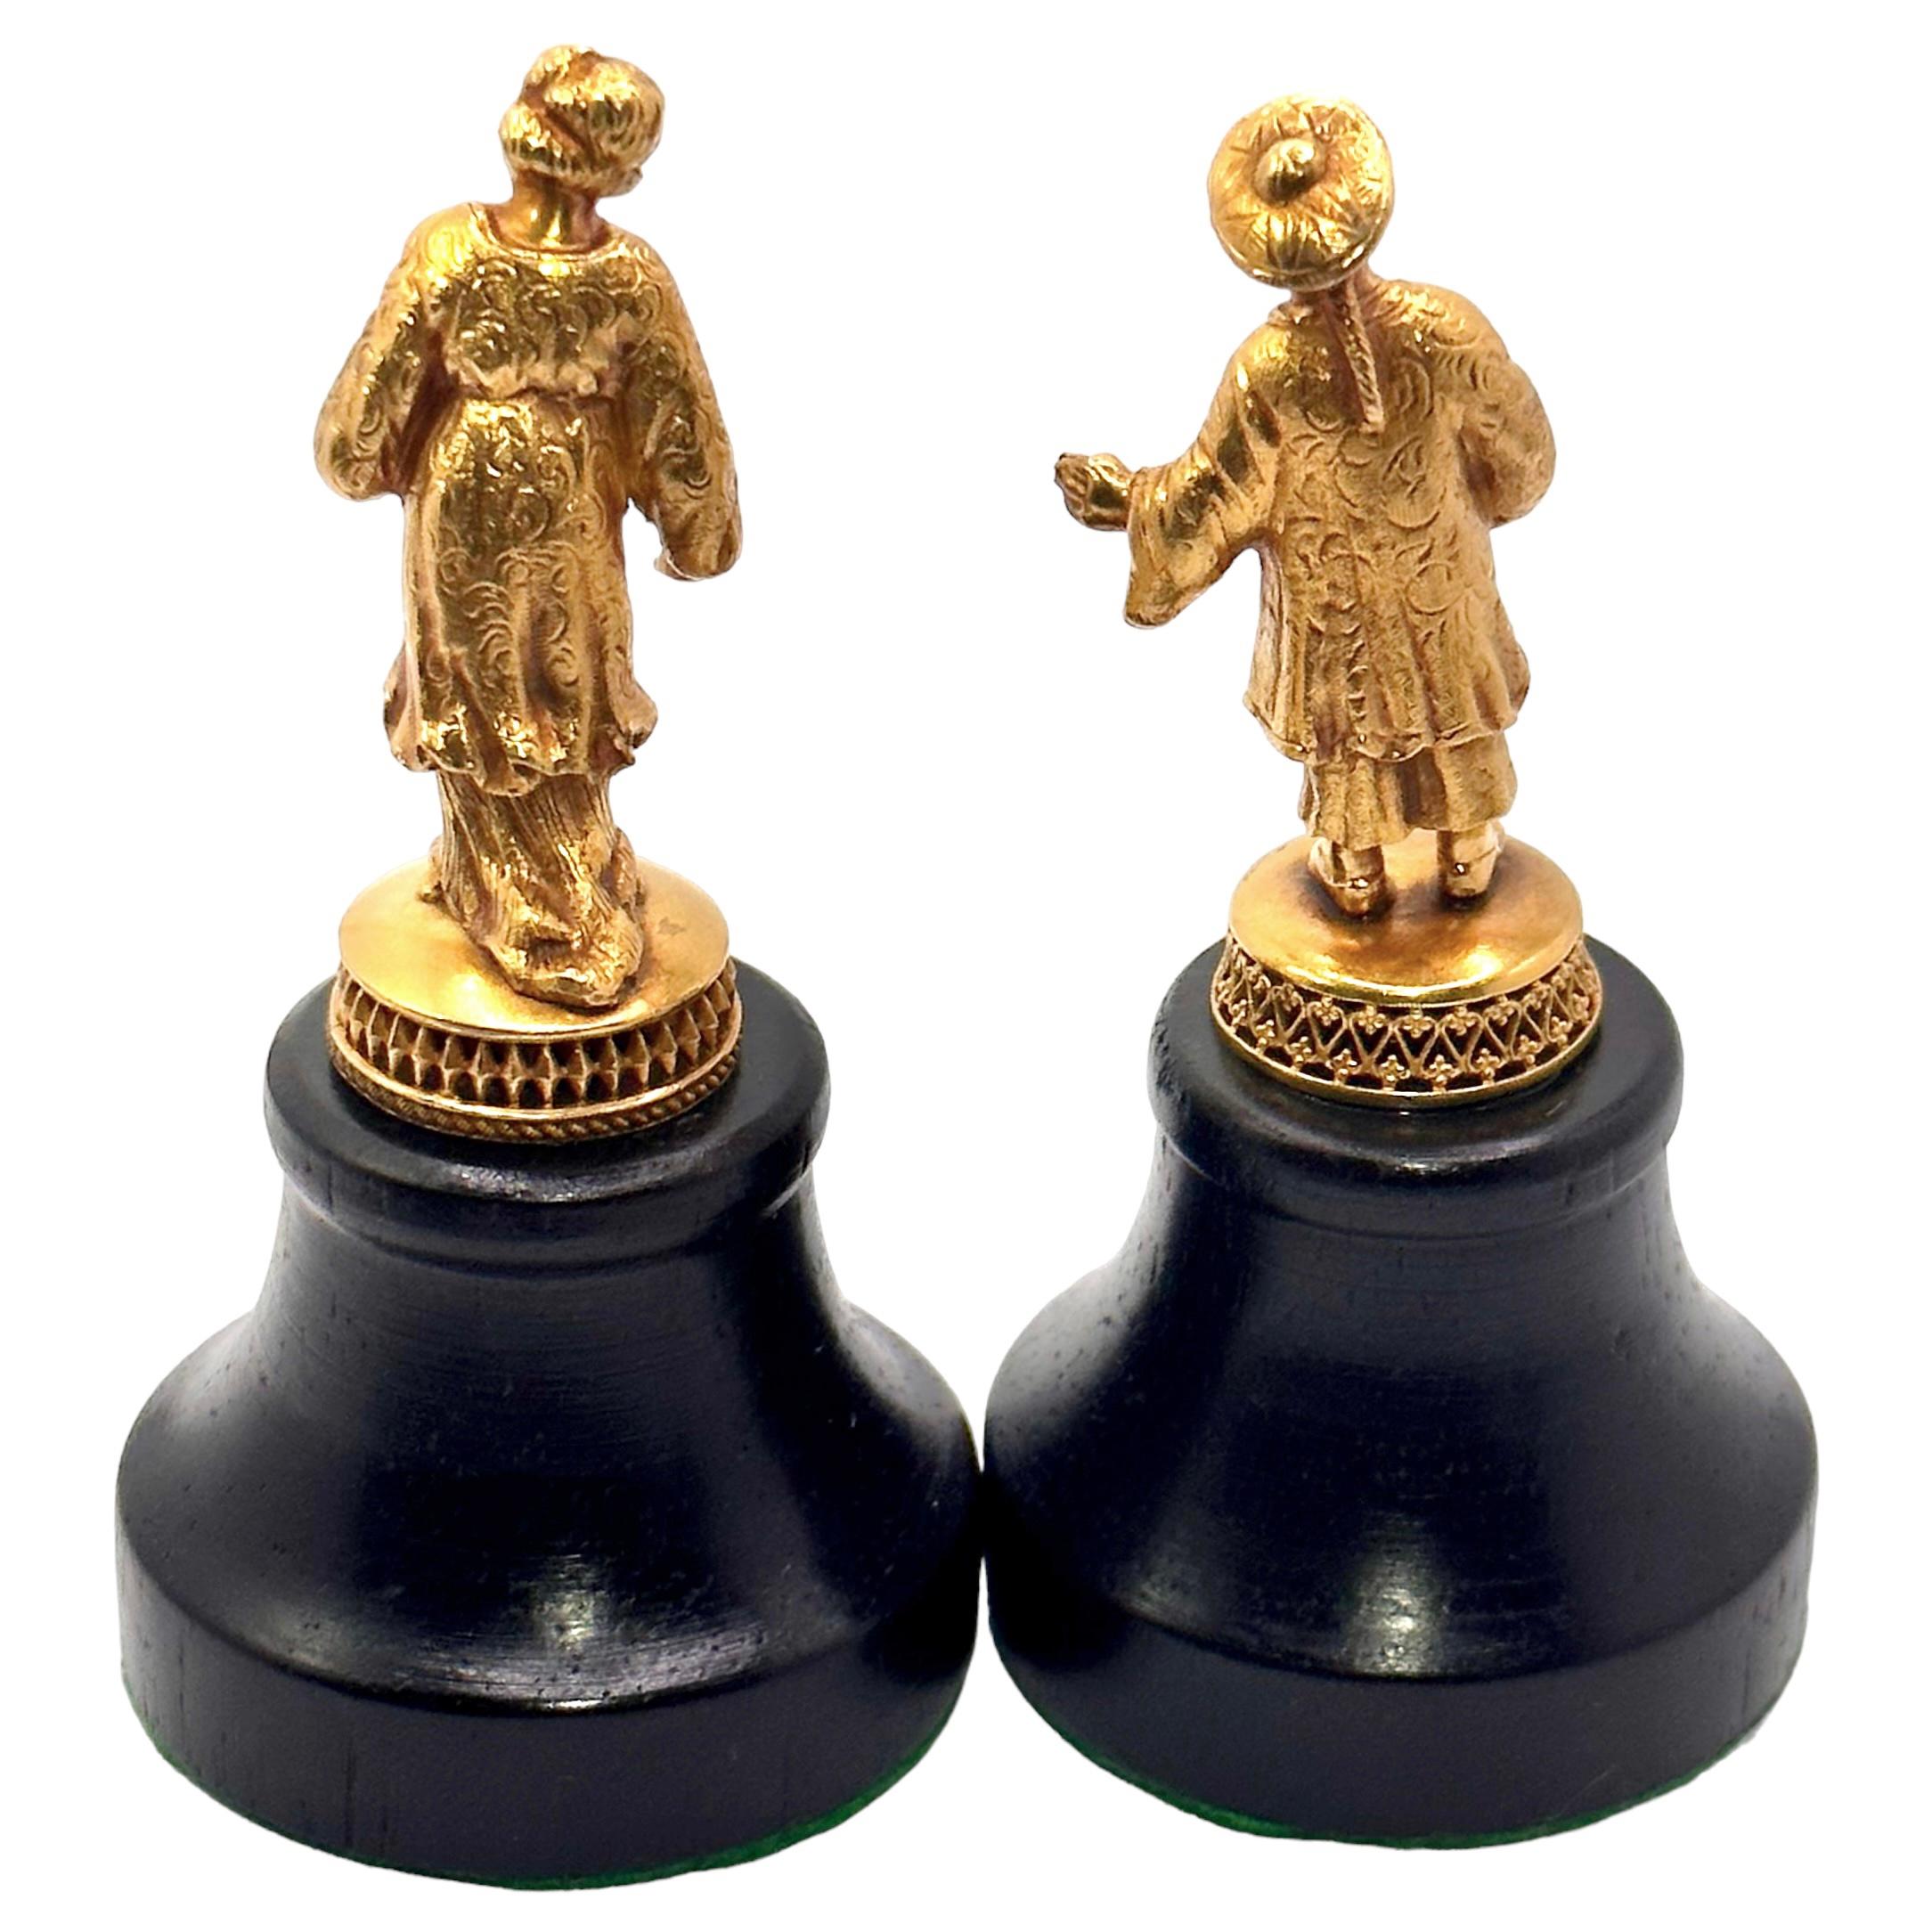 This extremely well executed pair of Antique Asian Caricatures in traditional garb are unique in our experience. It is evident from the manner and dress of these small jewels, that this pair are from a noble social class. Each figure is